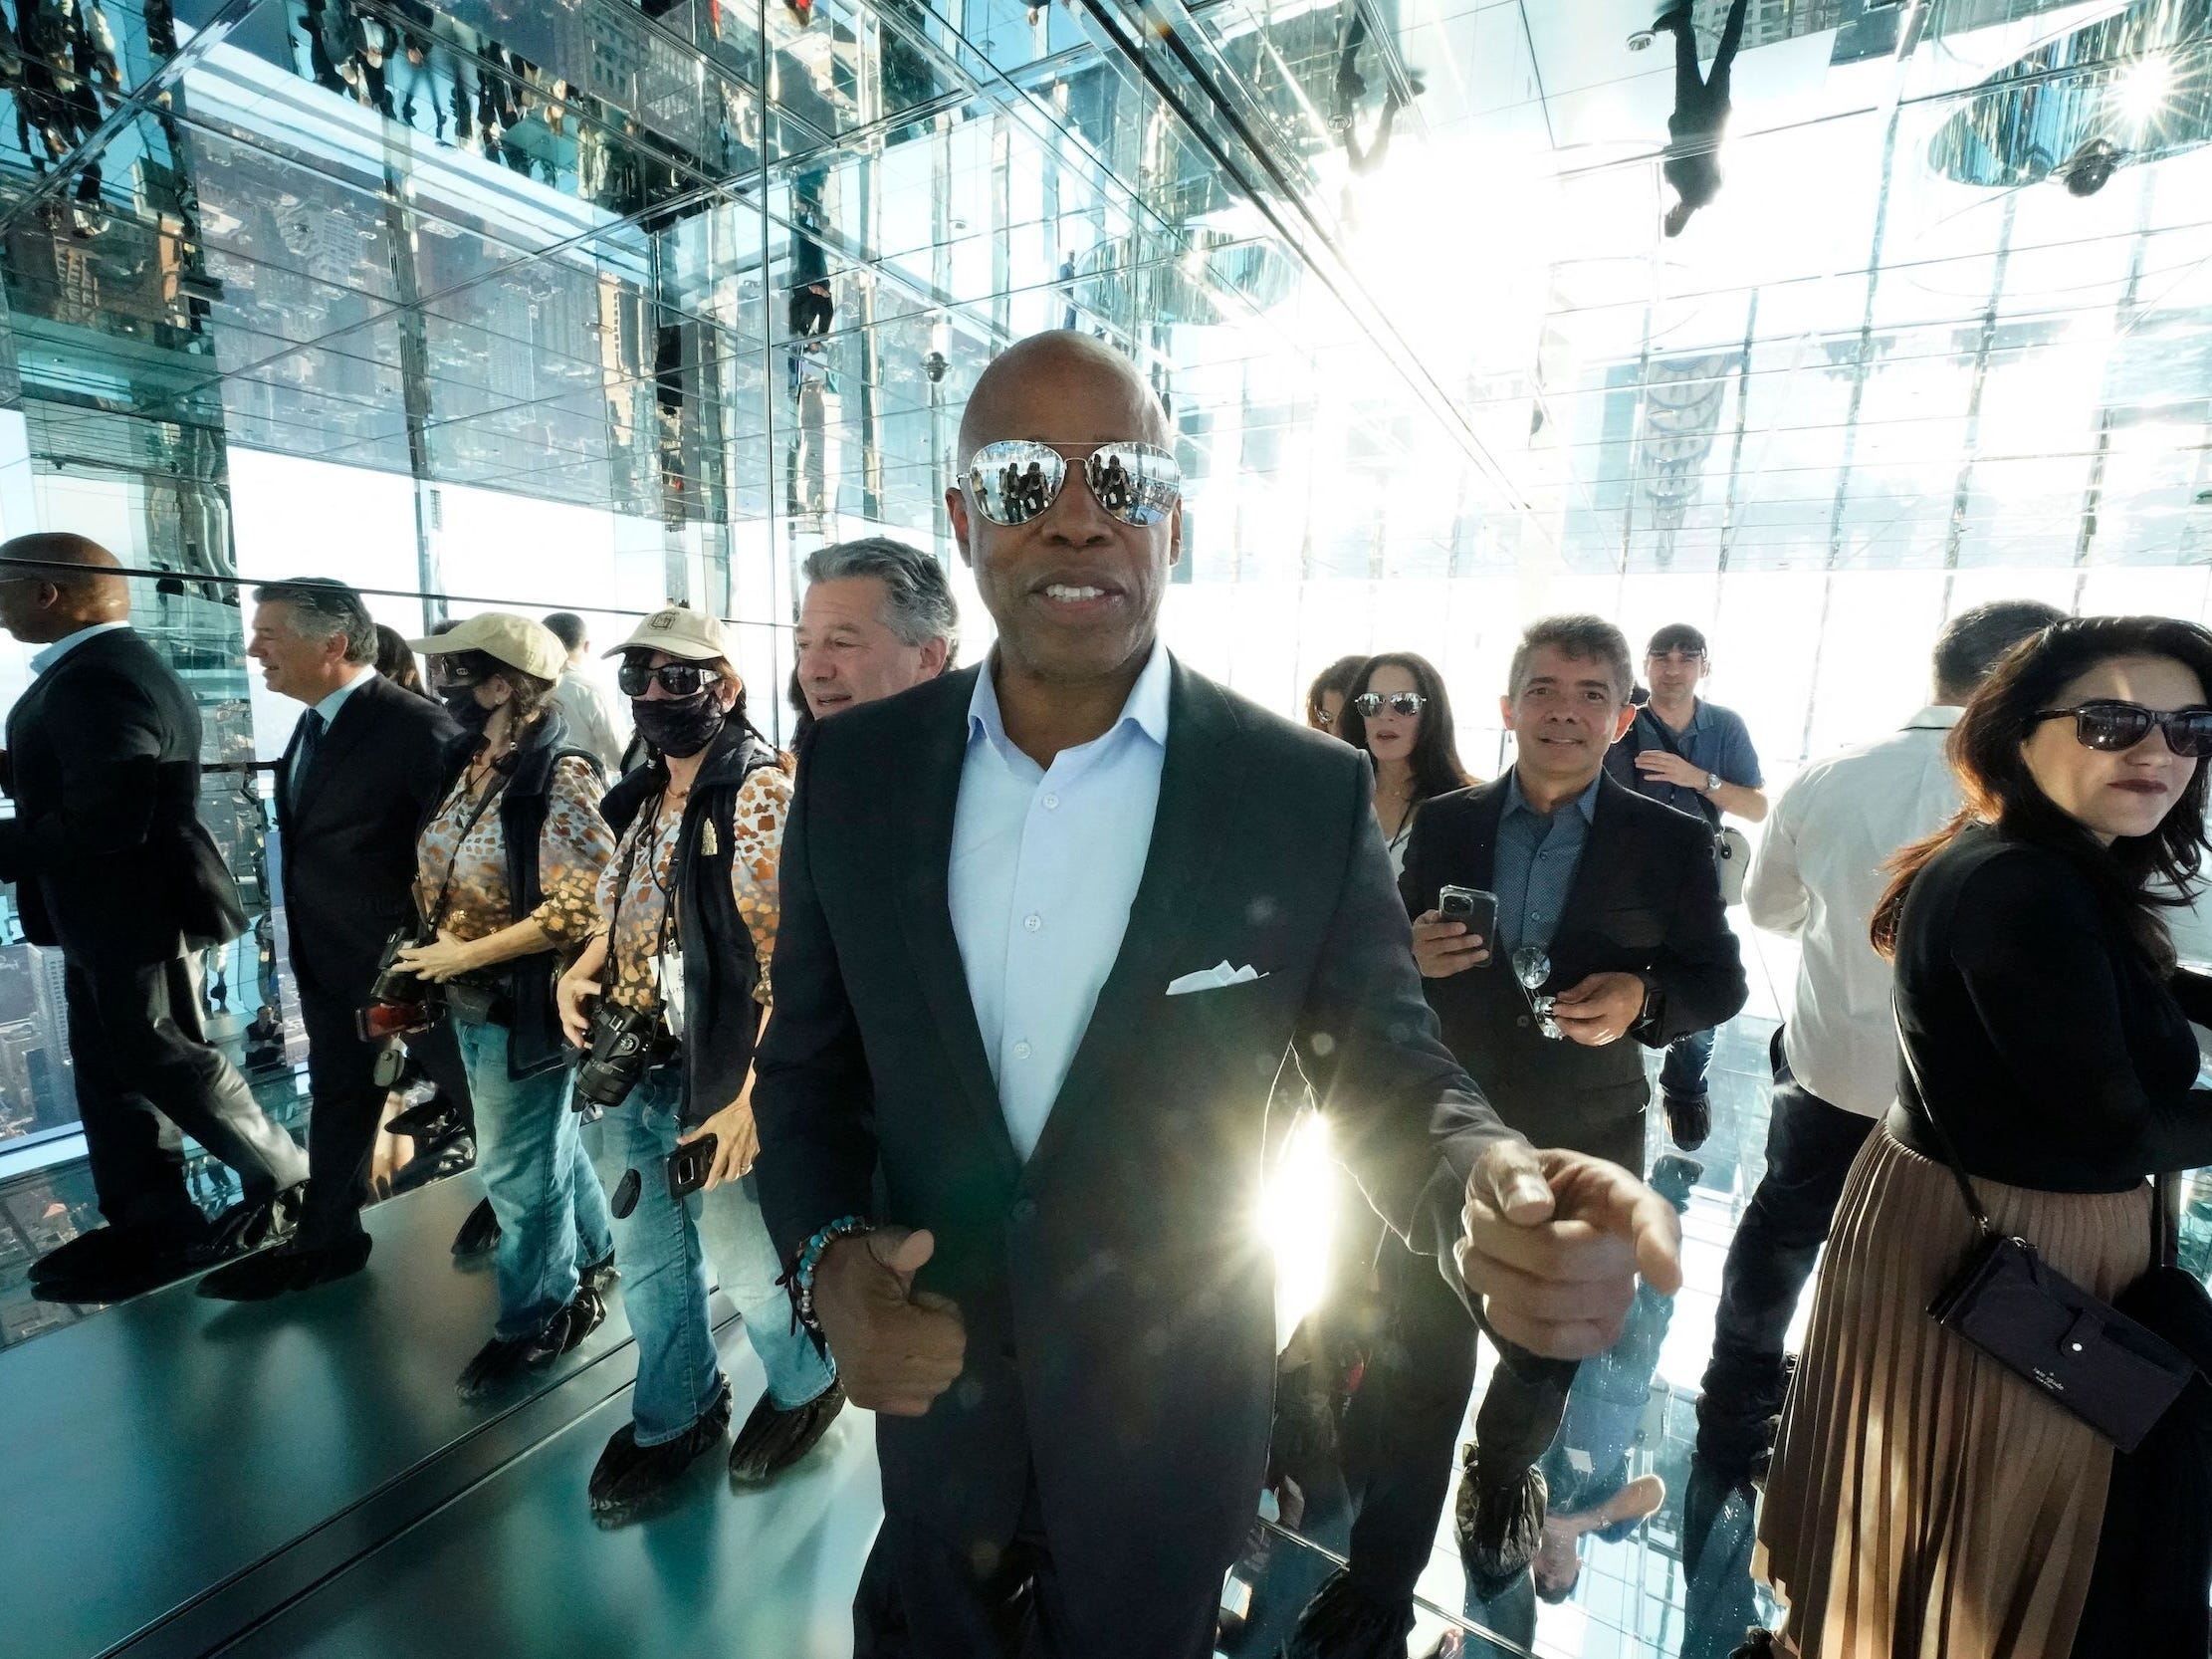 Democratic Nominee for Mayor Eric Adams (C) arrives before cutting the ribbon during the official opening of SUMMIT One Vanderbilt on October 21, 2021 in New York.